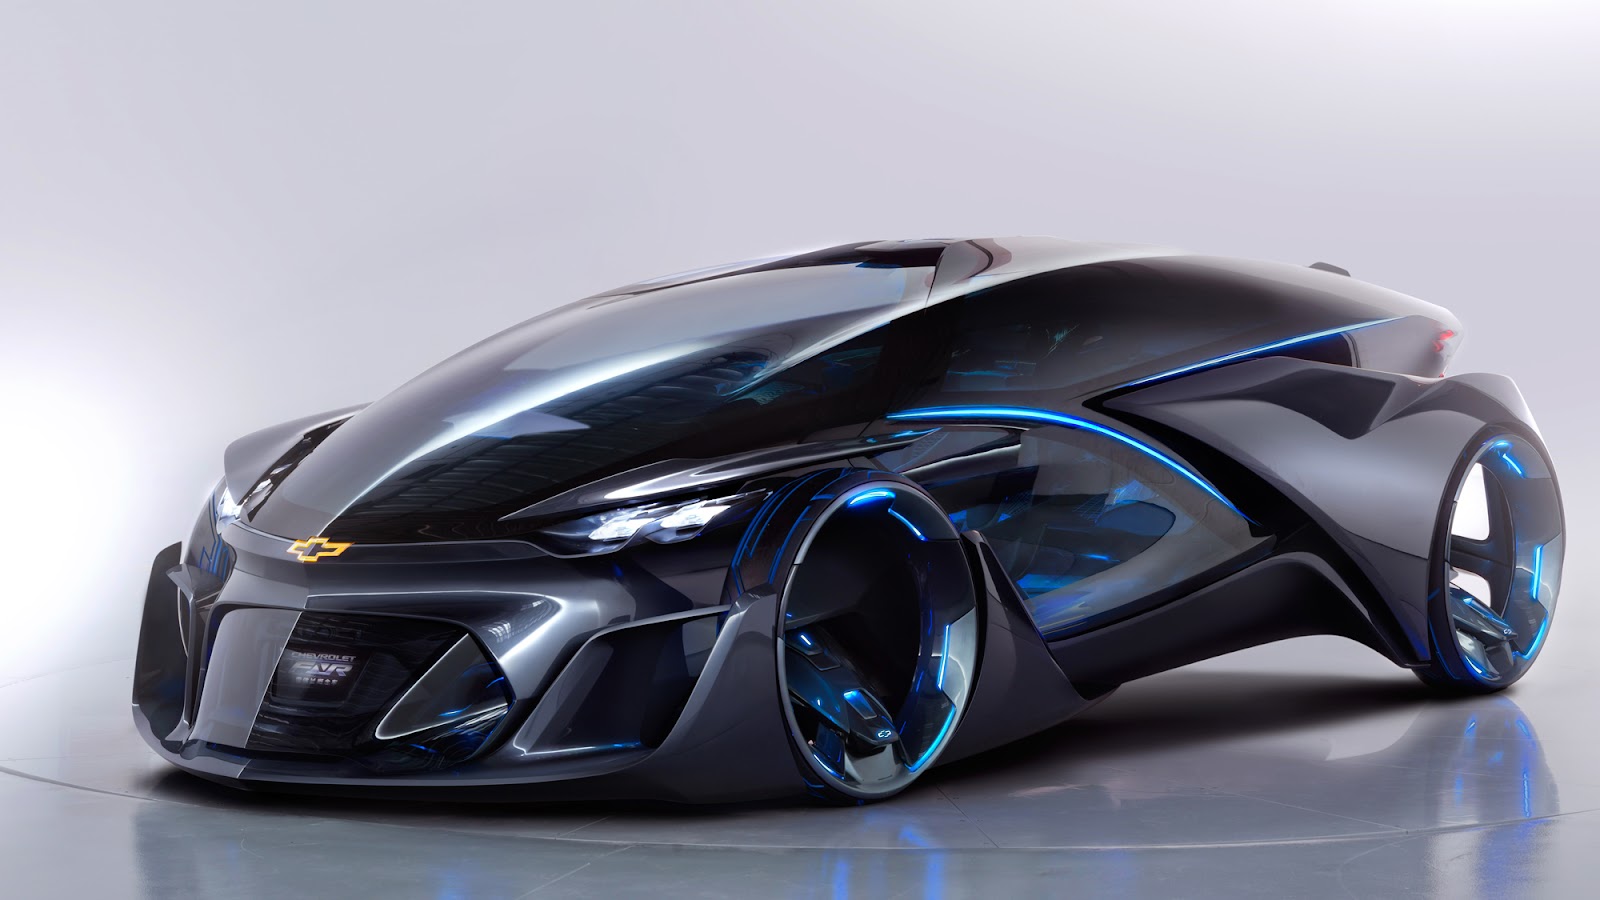 The 6 best concept cars: Here are the coolest prototypes we've seen